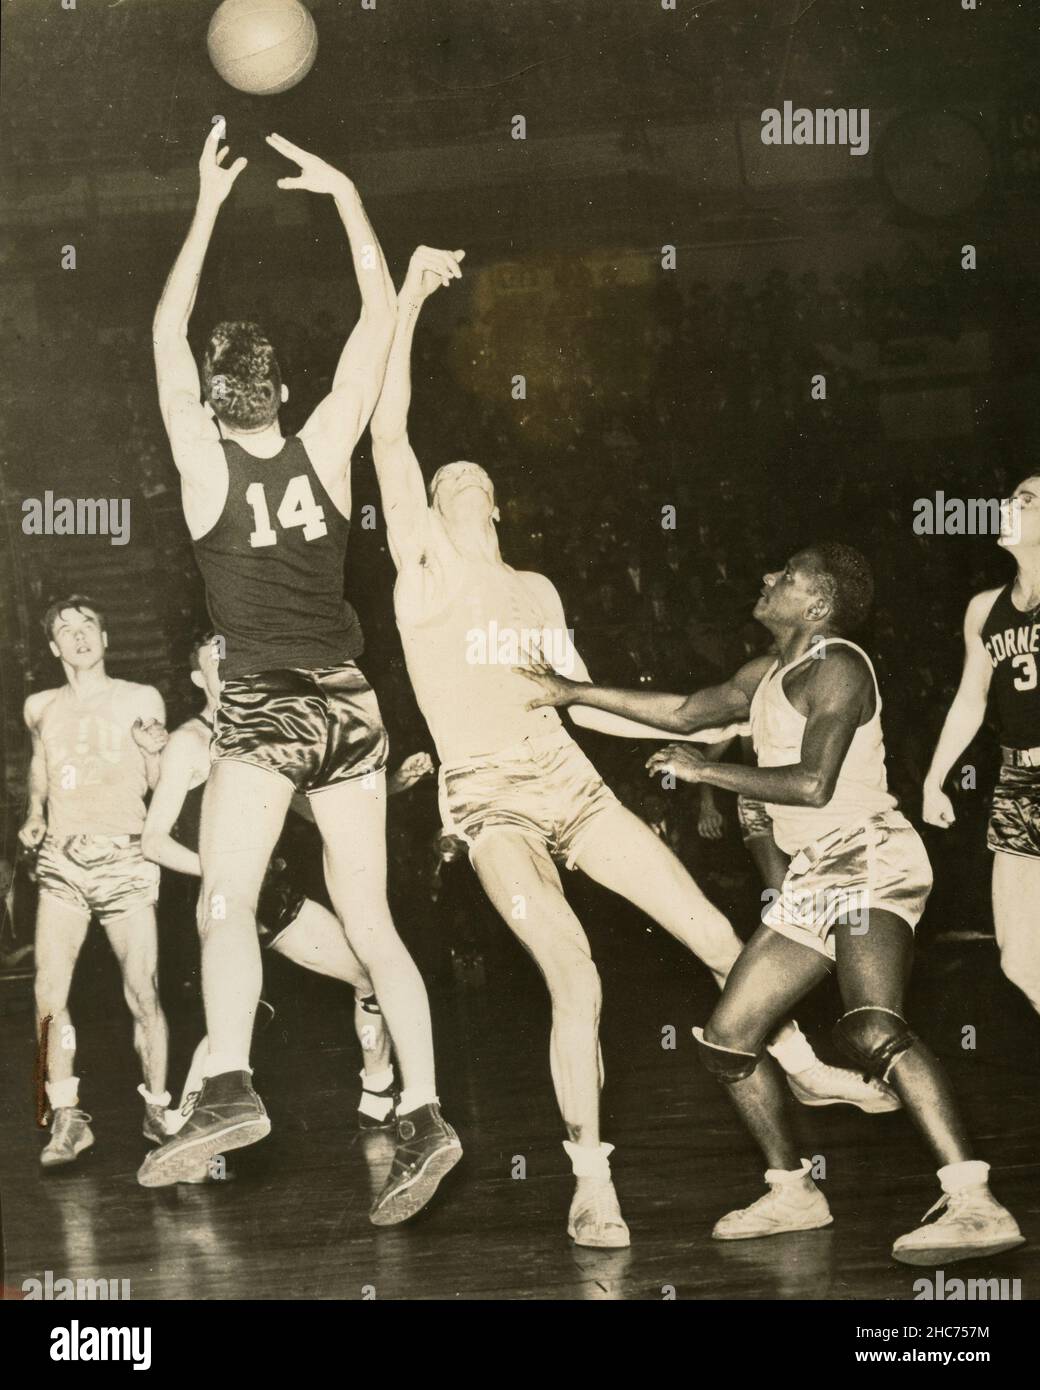 American College Basketball Players in Action: Len Hassman and Bob Gale, USA 1940s Stock Photo